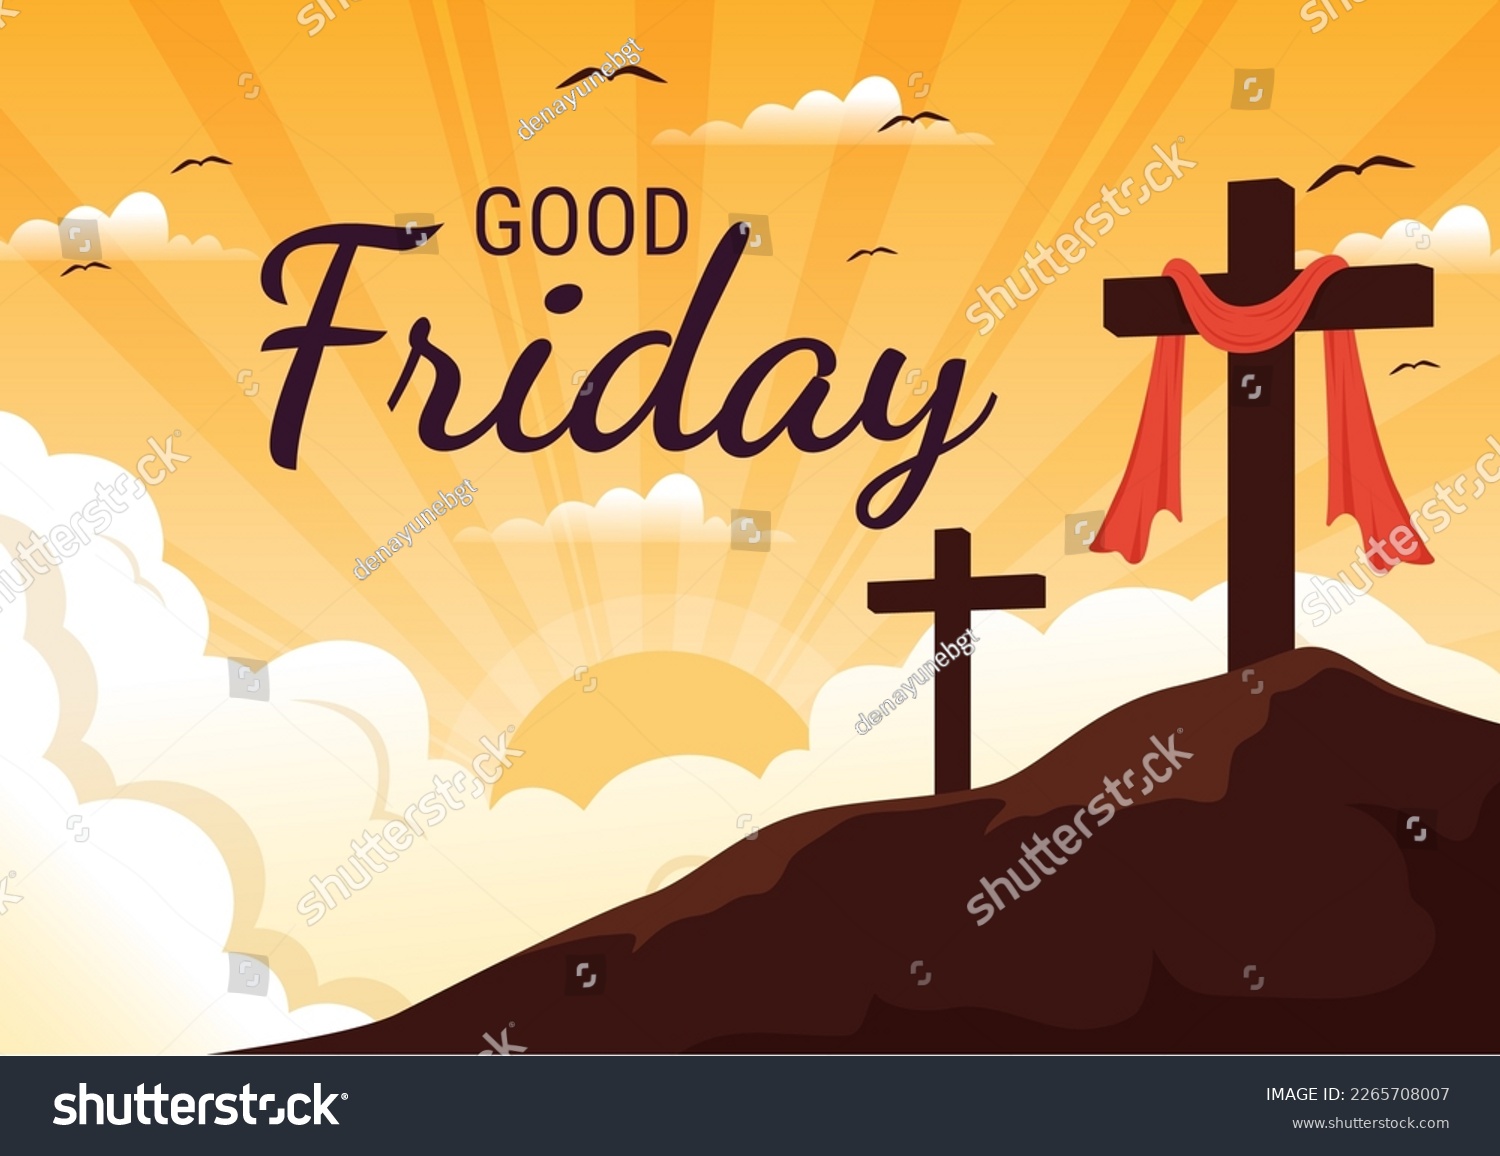 Happy Good Friday Illustration with Christian Holiday of Jesus Christ Crucifixion in Flat Cartoon Hand Drawn for Web Banner or Landing Page Templates #2265708007